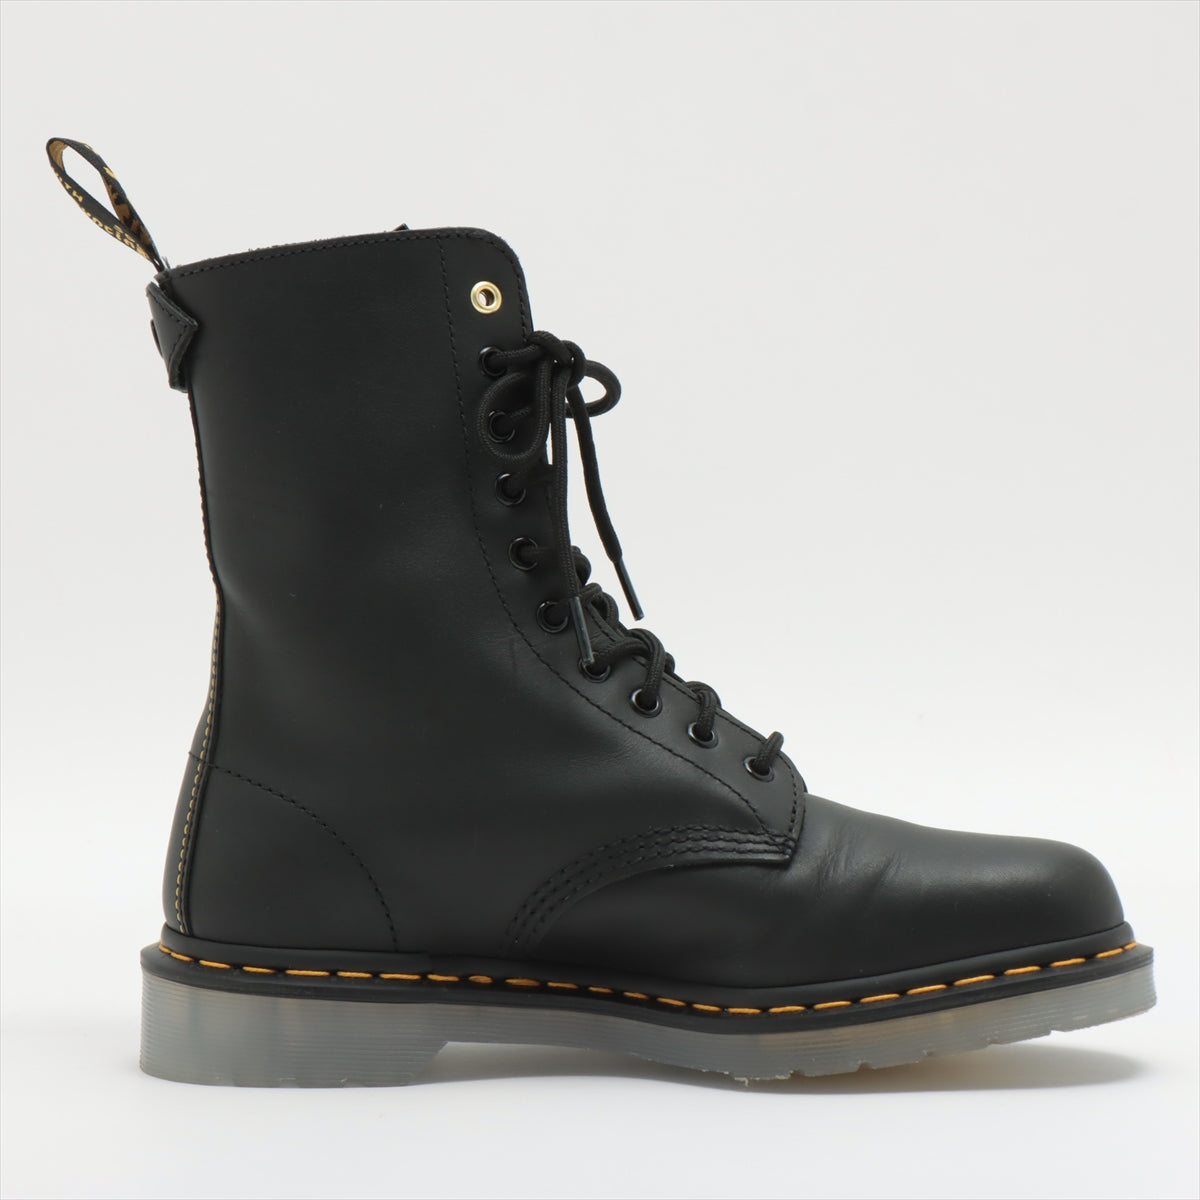 Dr. Martens x Yohji Yamamoto 22SS Leather Boots UK8 Men's Black 1490 Hidden Zip YY There is a box